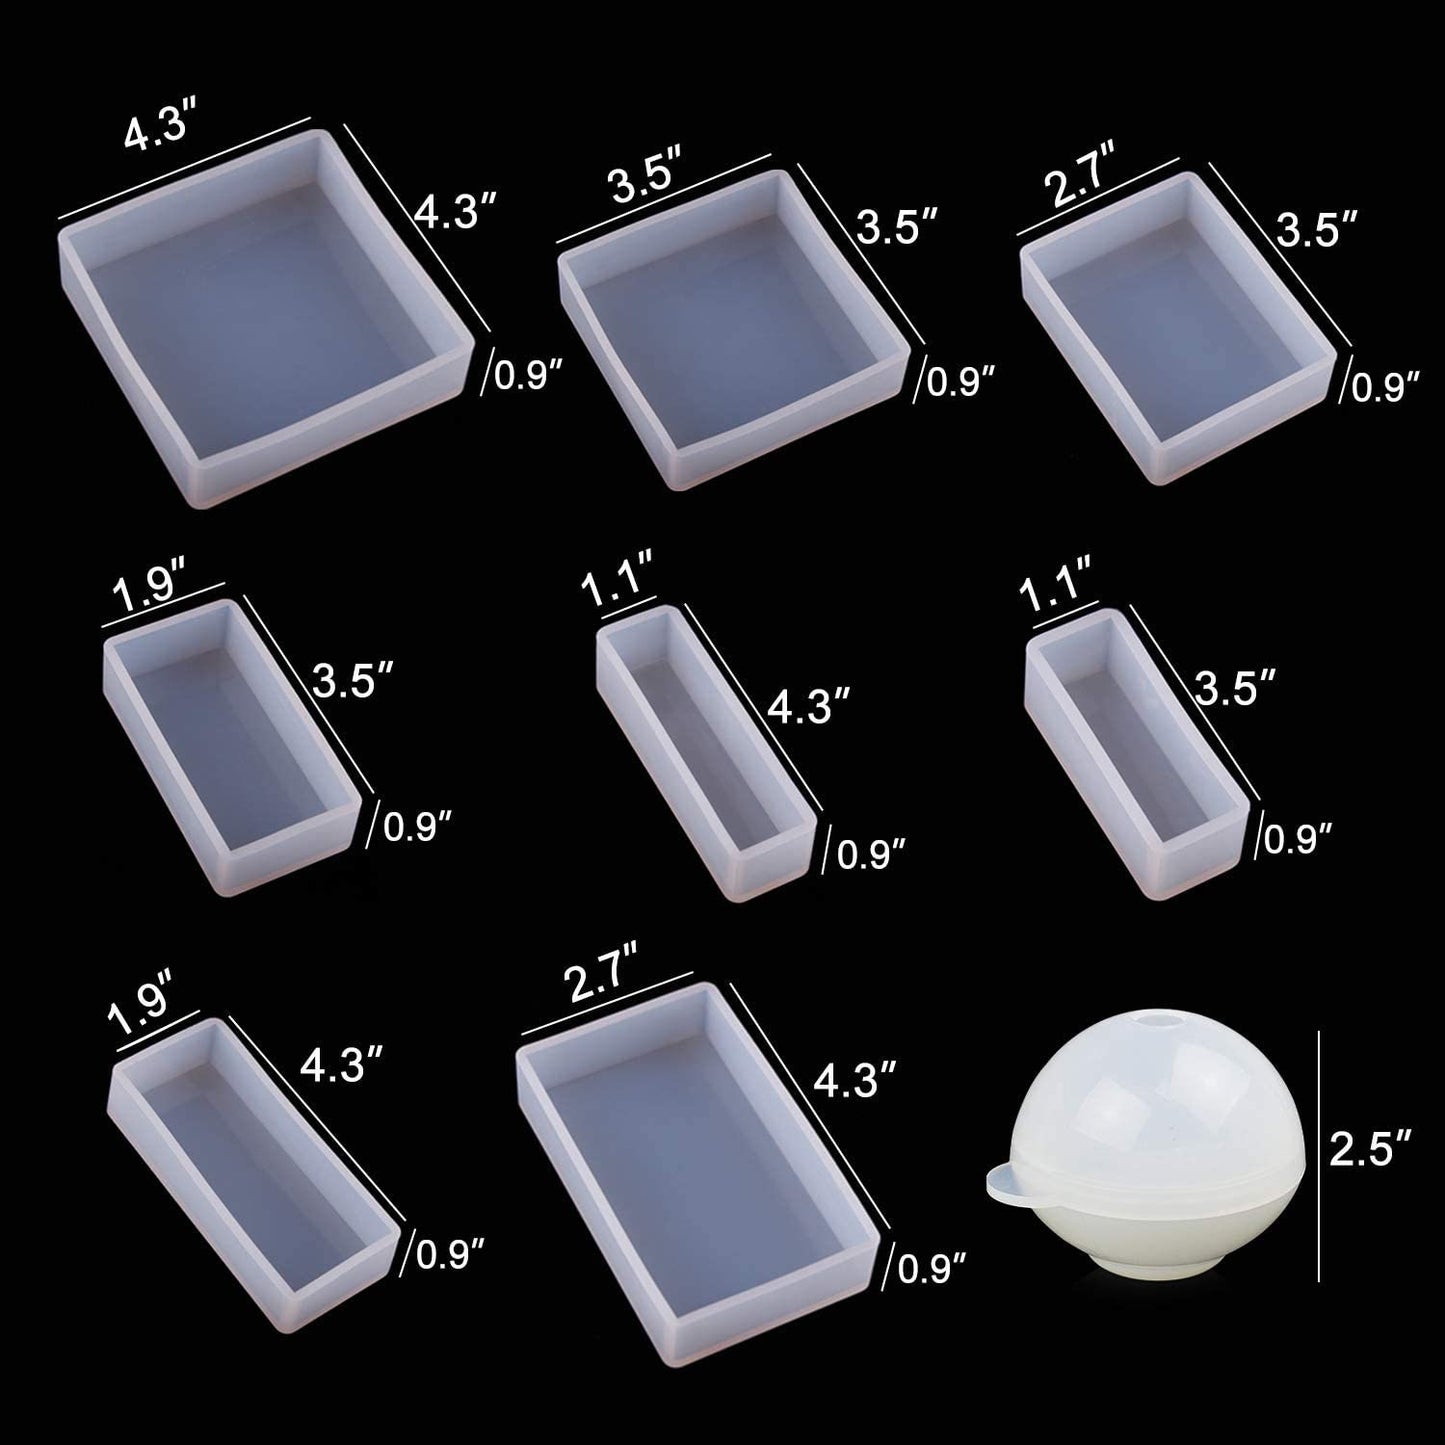 Bath Soap Silicone Mold Kit - Silicone Mold Kit for Resin, Soaps, Bath Bombs, and Candles